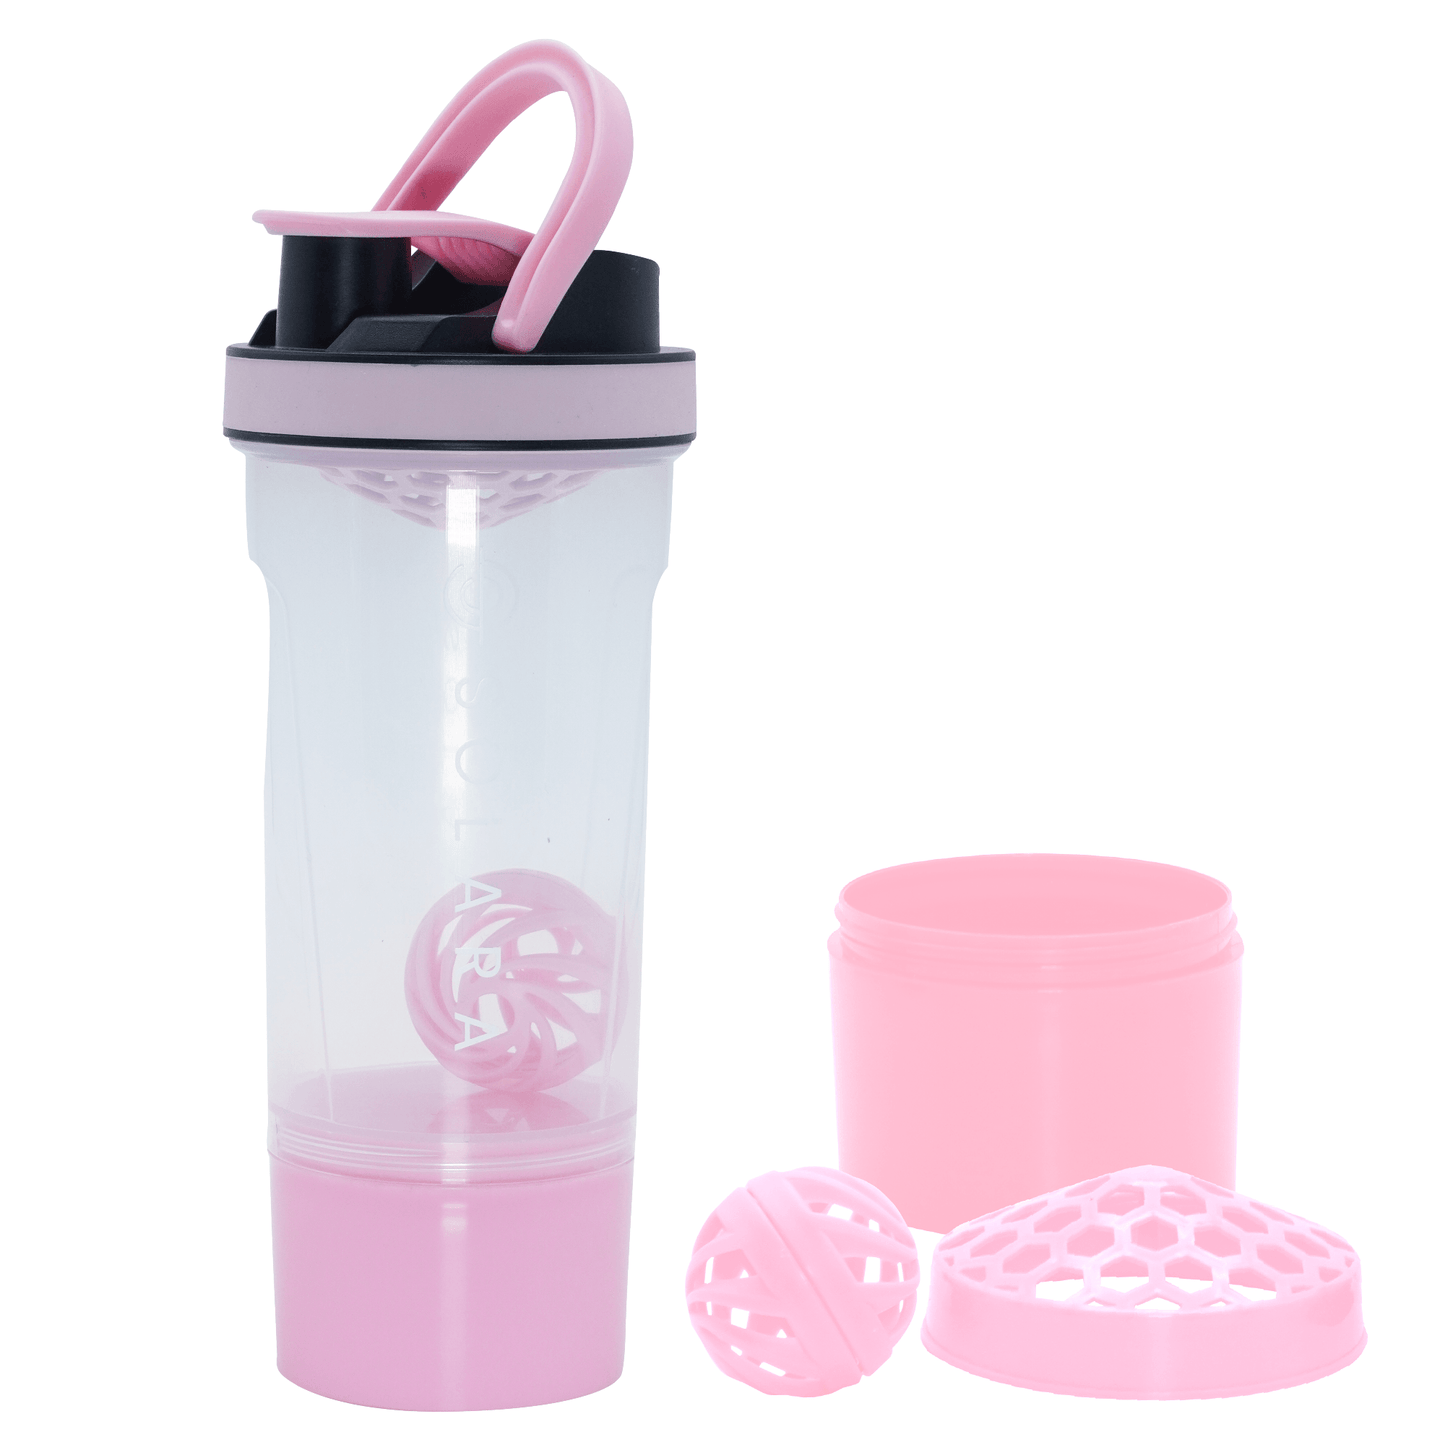 Protein Shaker Bottle with Shaker Ball & Mixing Grid -Pink